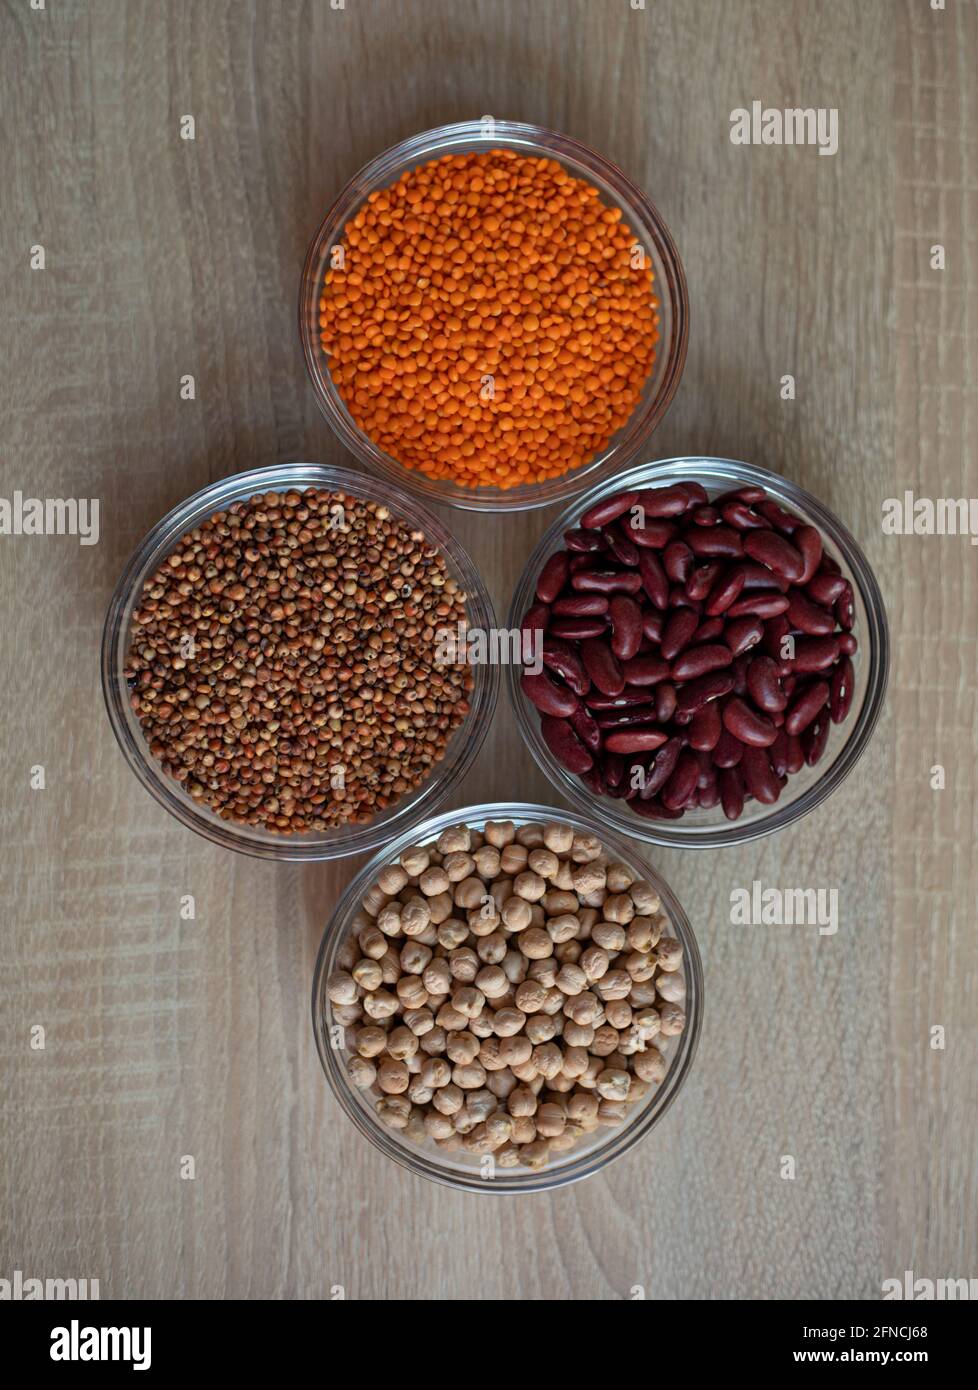 Bowls of cereal grains: chickpeas, red lentils, red bean, sorghum grain Stock Photo